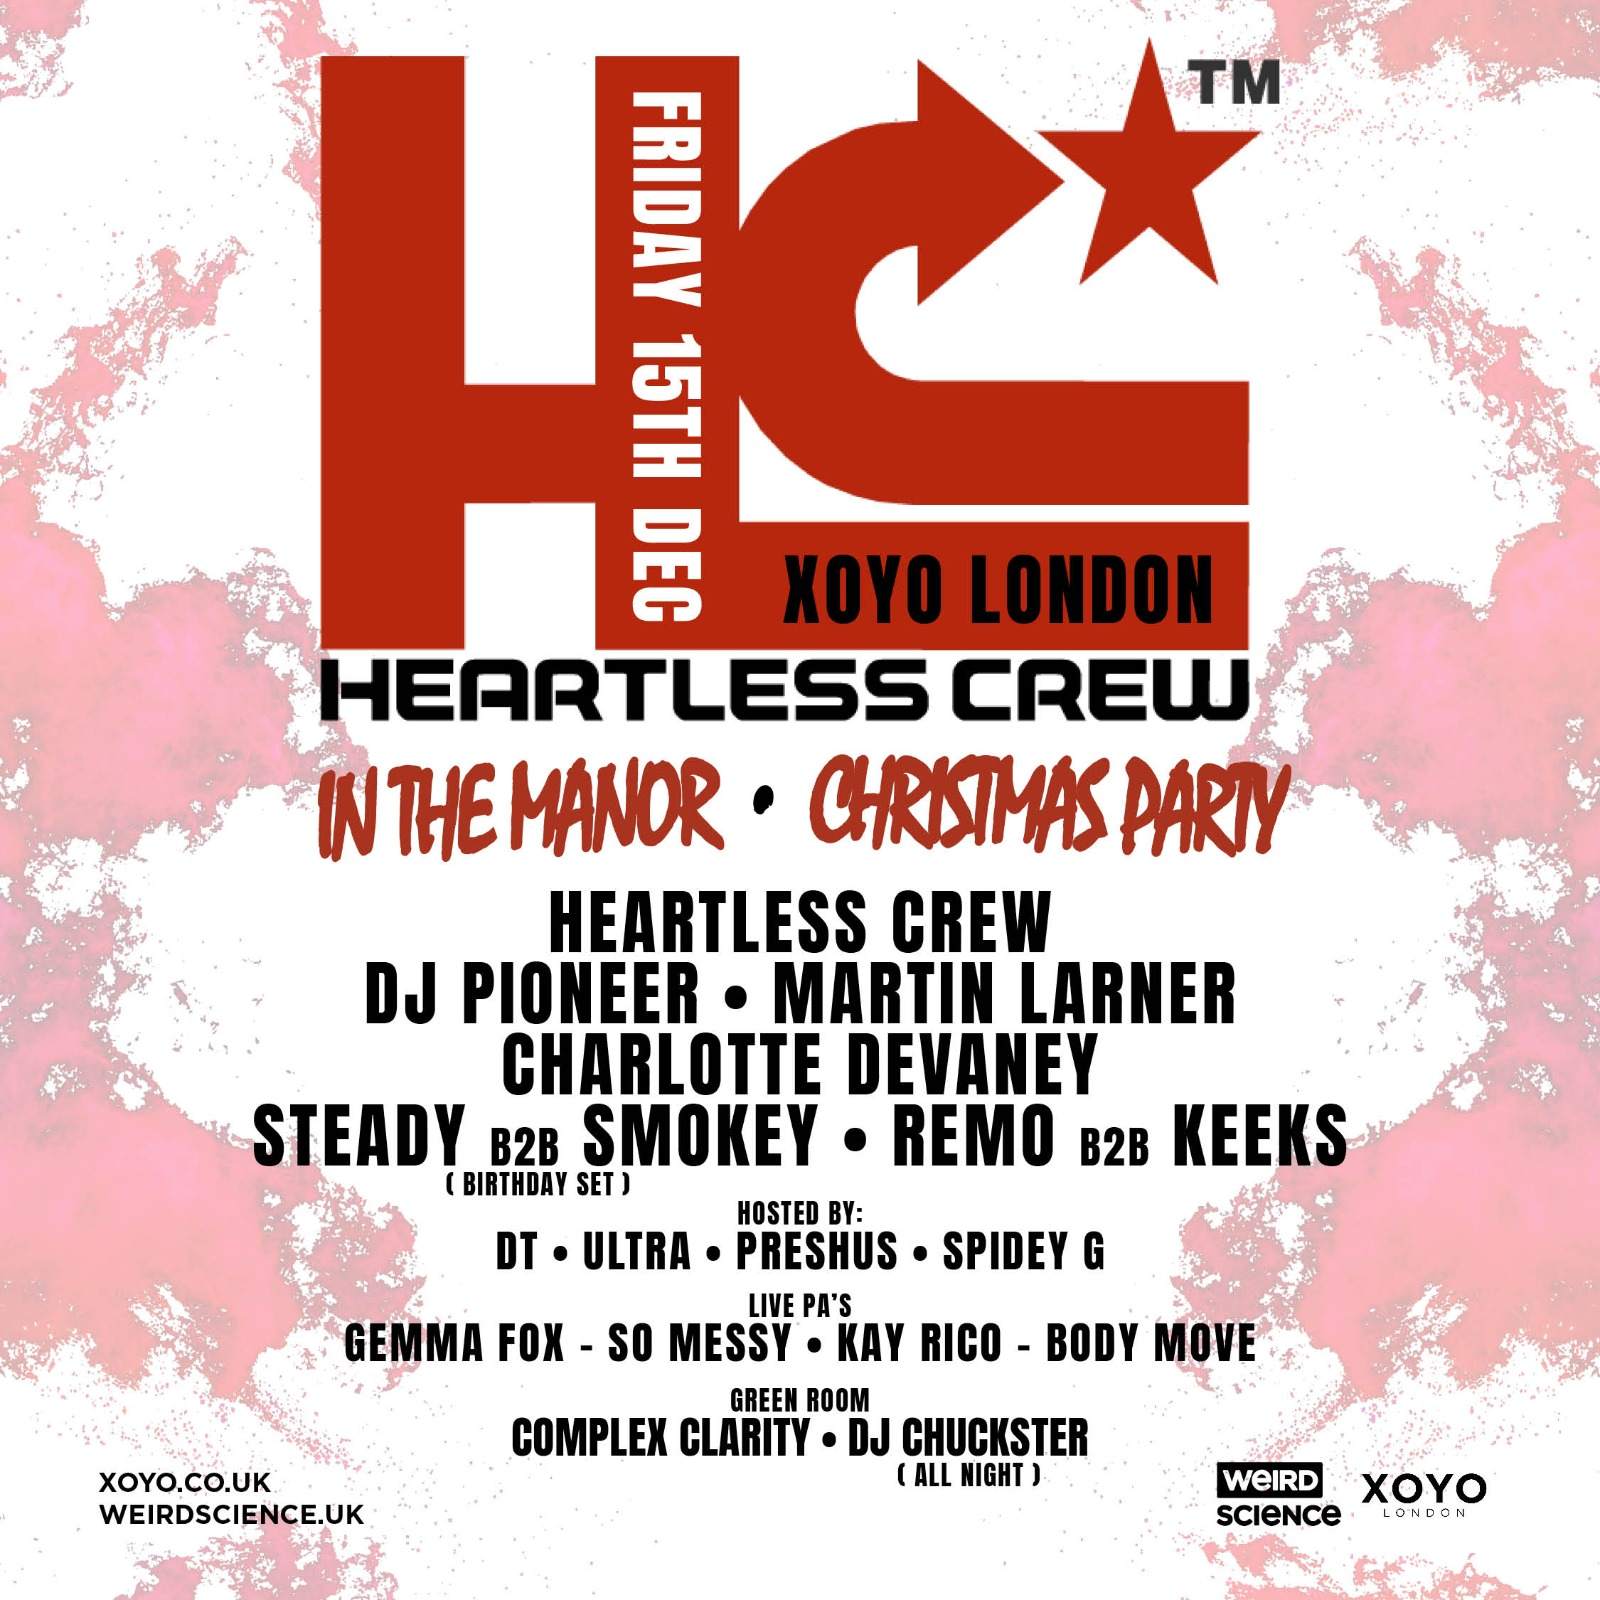 Heartless Crew In The Manor Christmas Party (UK Garage, House) - フライヤー裏